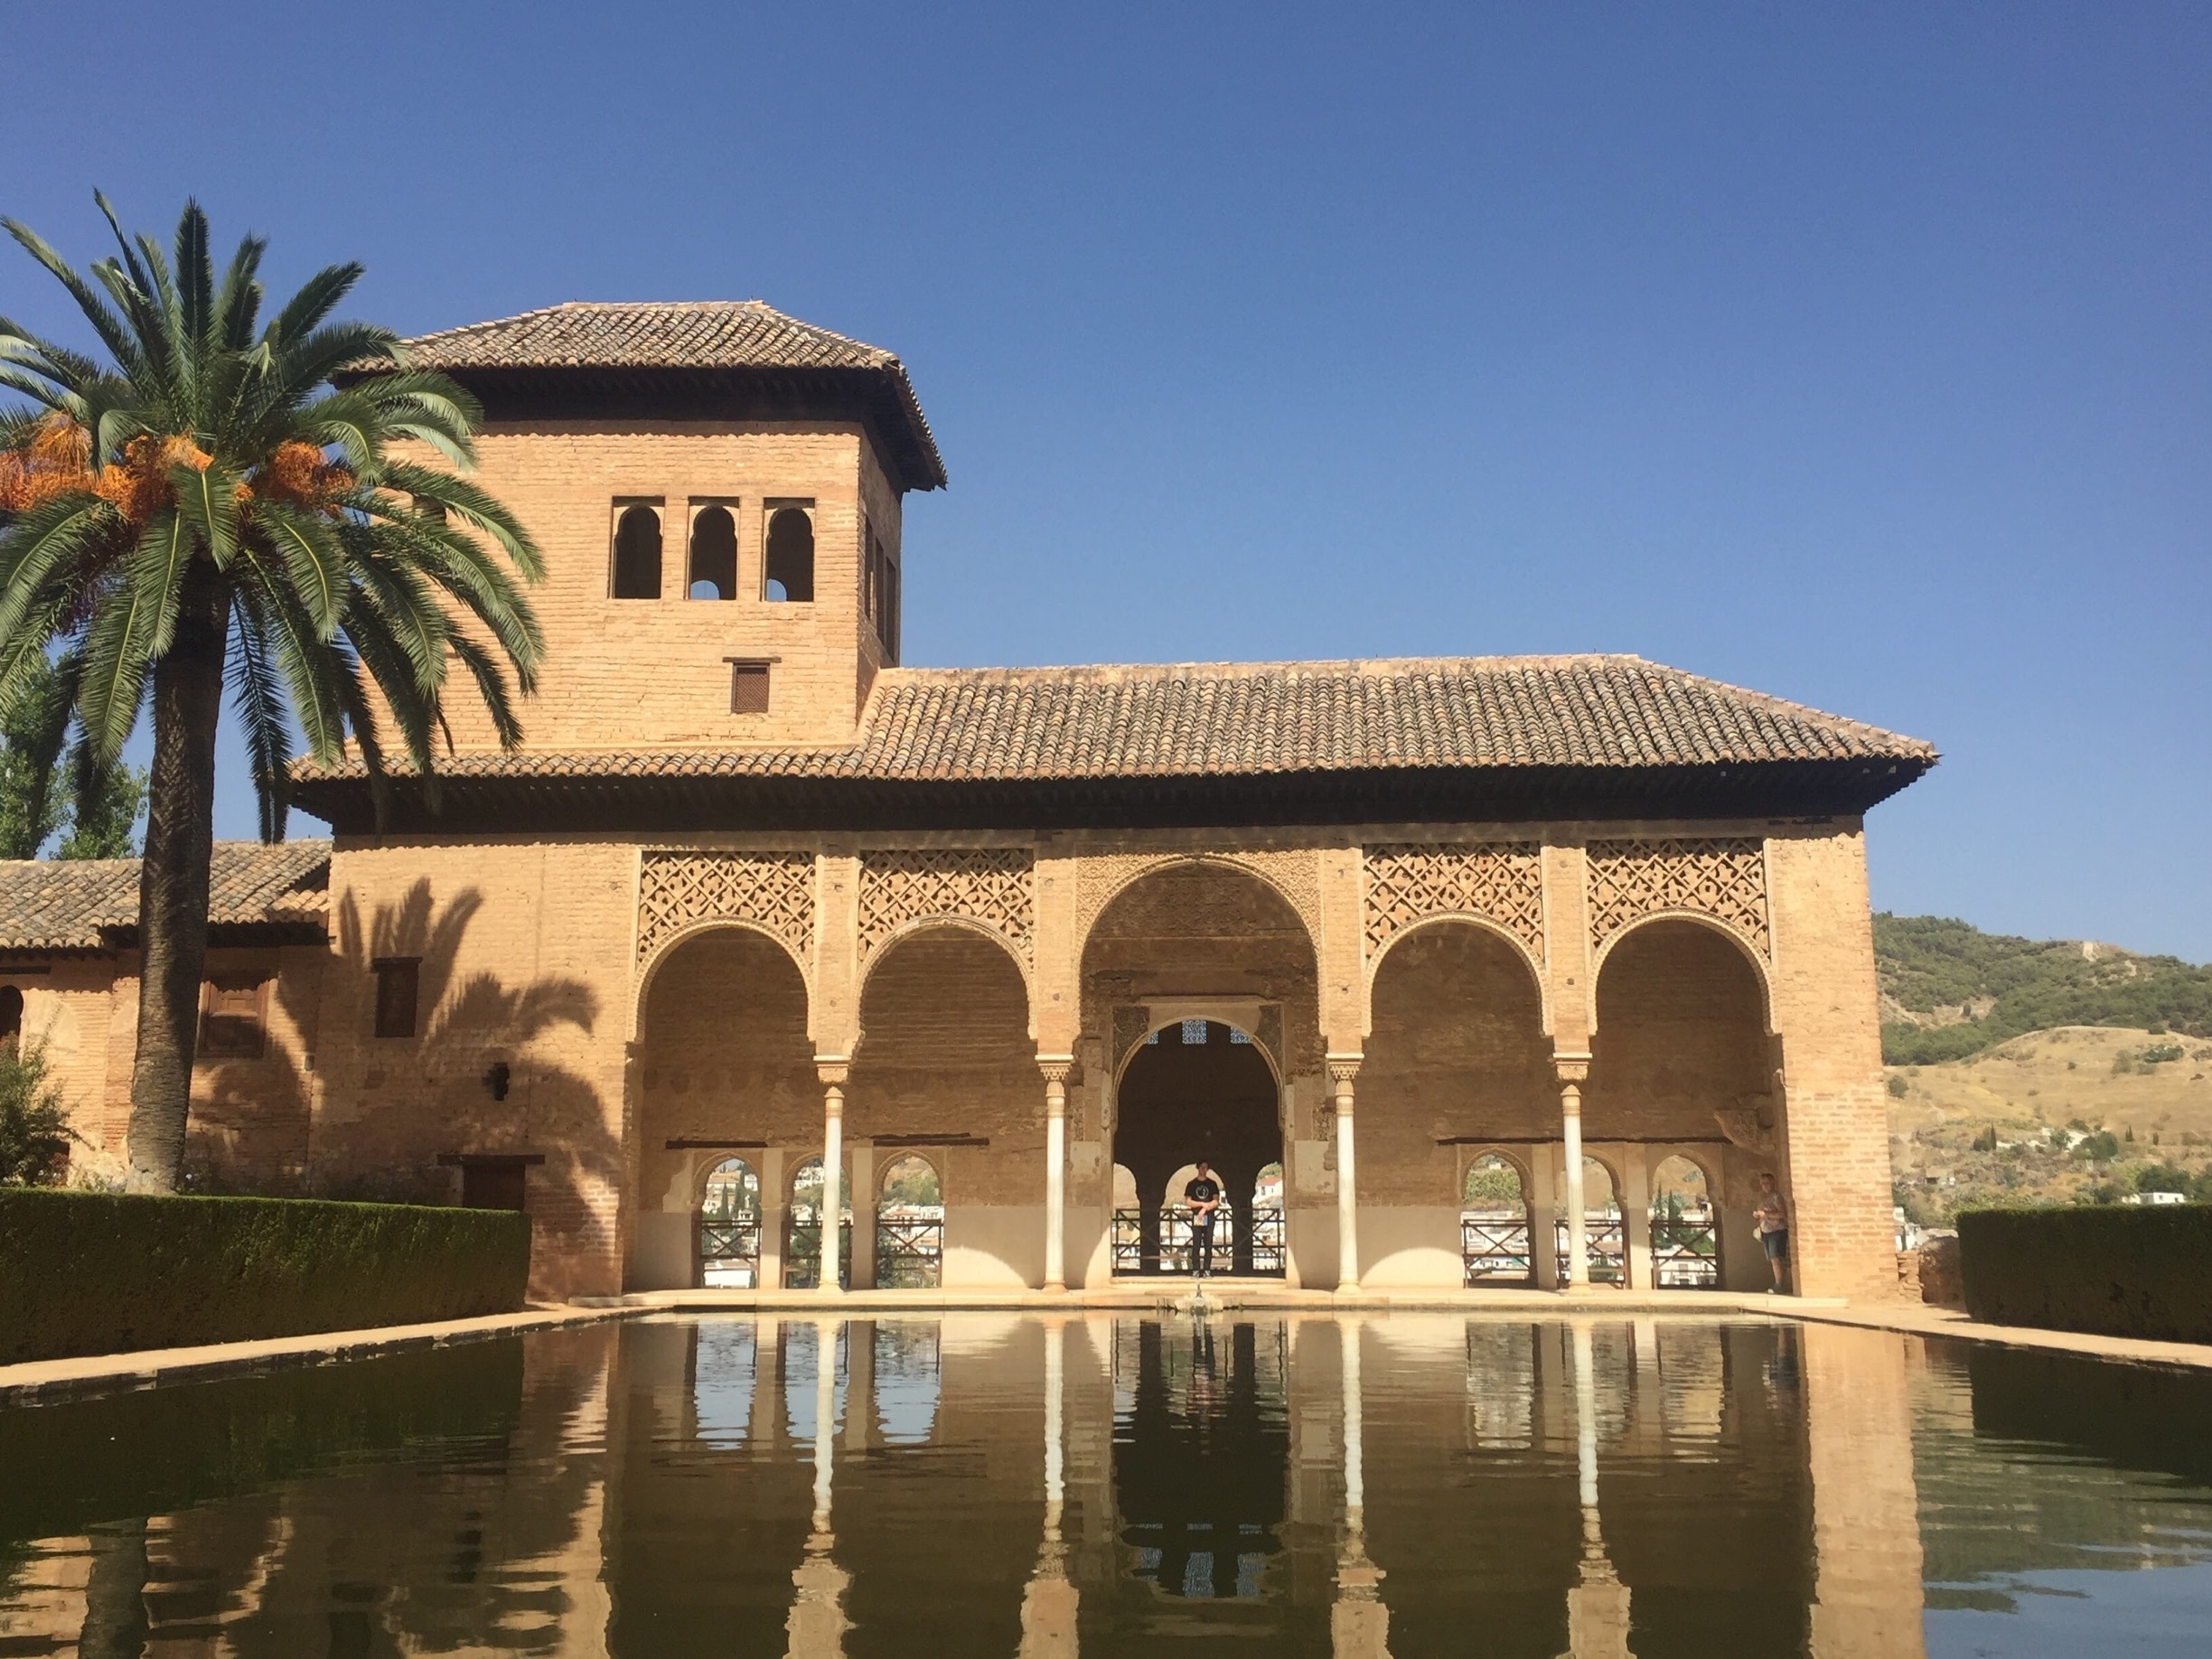 If you go to #Granada you can't miss #LaAlhambra. #LifeatExpedia